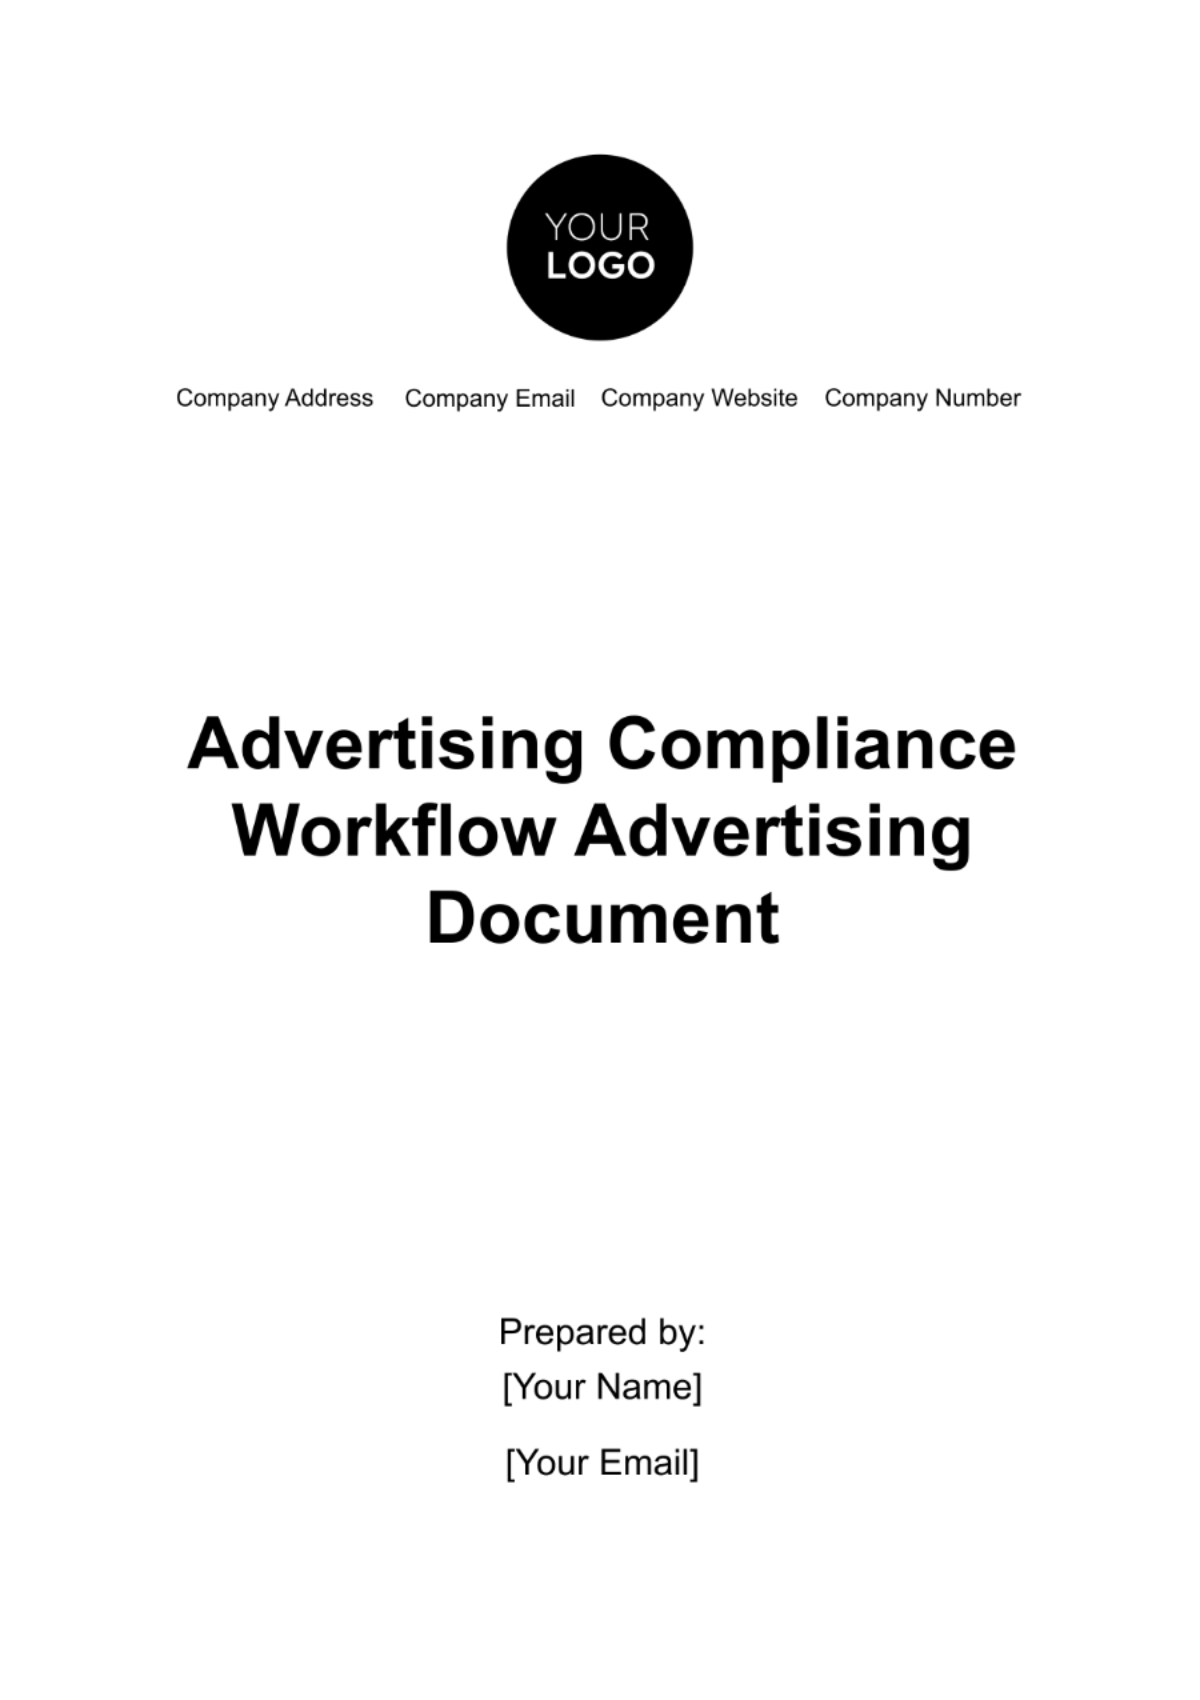 Advertising Compliance Workflow Document Template